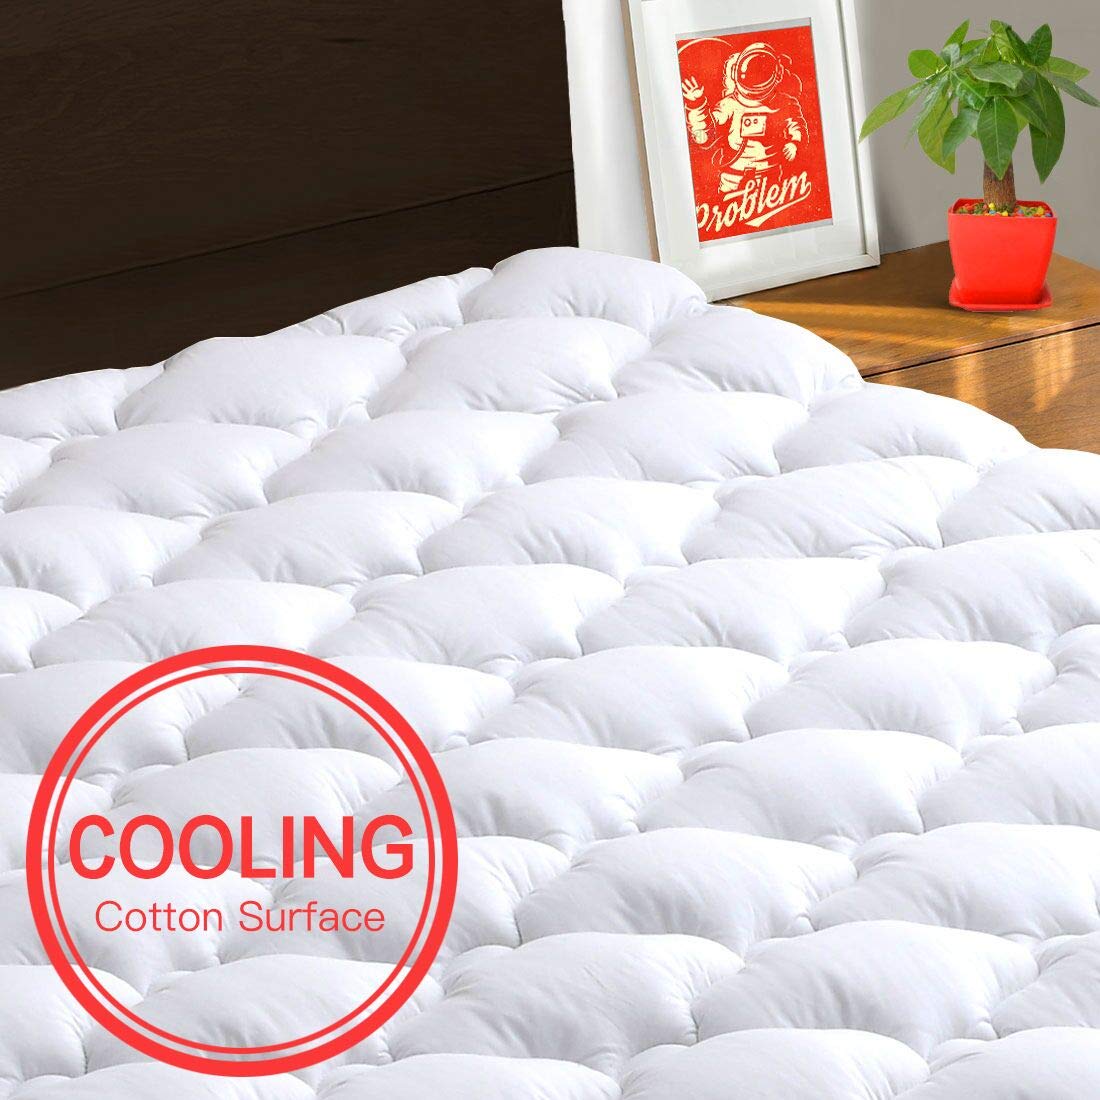 Best Cooling Mattress Pad 2020 - Review & Buying Guide ...